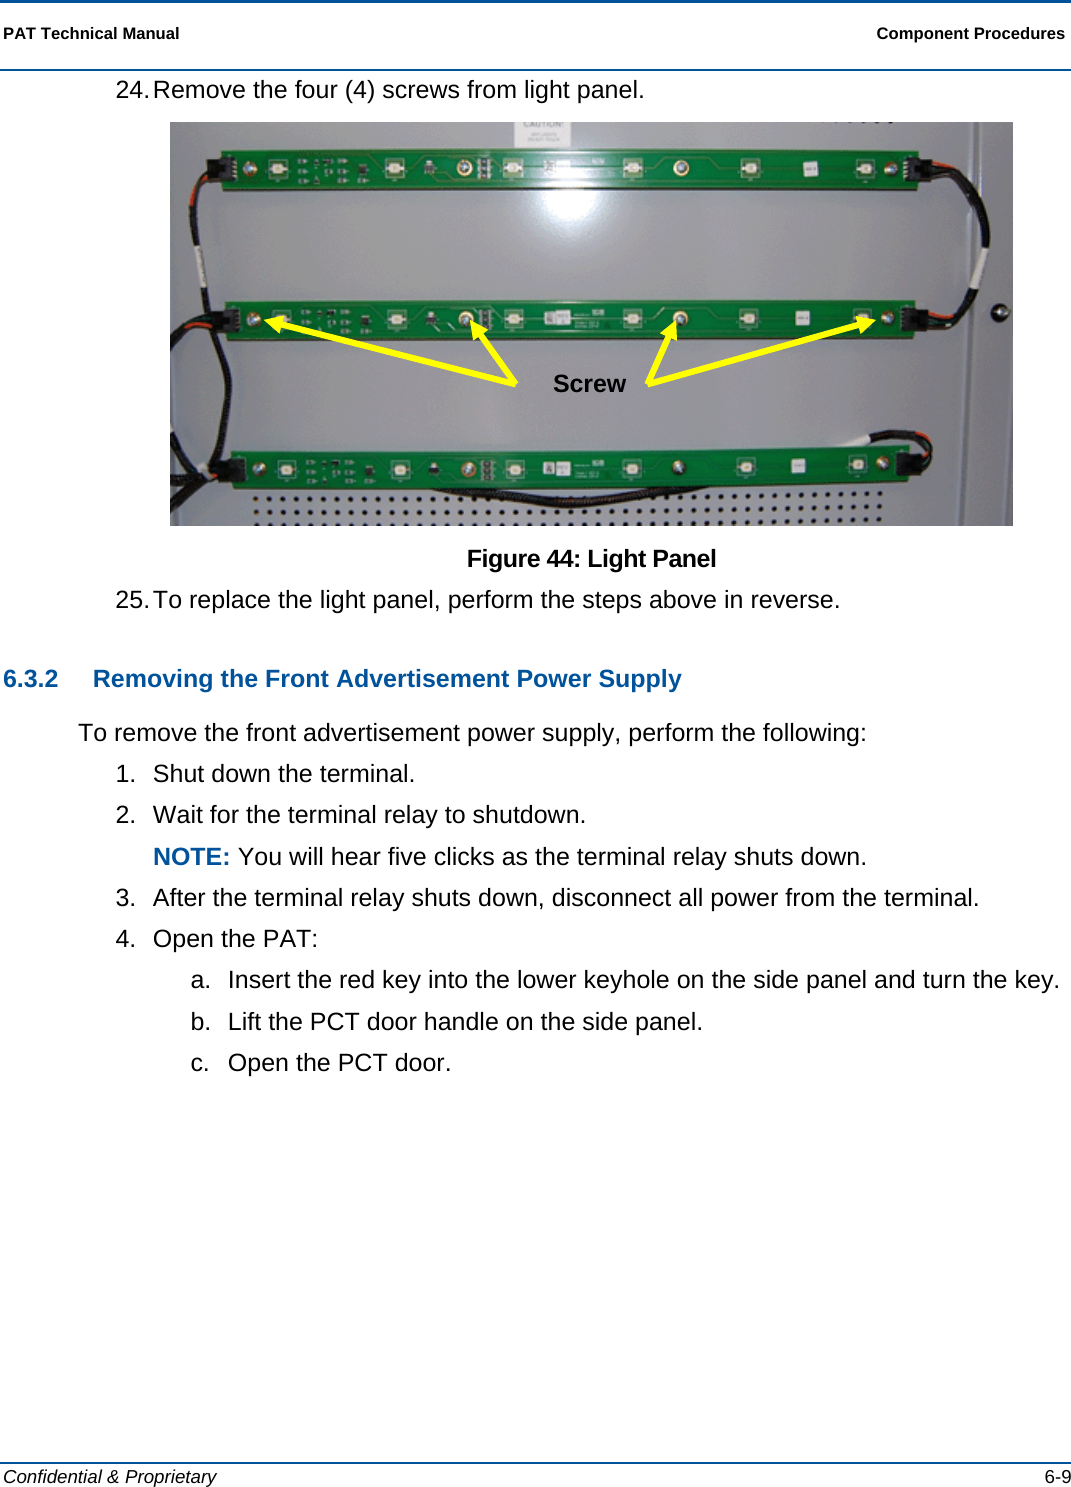  PAT Technical Manual  Component Procedures  Confidential &amp; Proprietary   6-9 24. Remove the four (4) screws from light panel.  Figure 44: Light Panel 25. To replace the light panel, perform the steps above in reverse. 6.3.2  Removing the Front Advertisement Power Supply To remove the front advertisement power supply, perform the following: 1.  Shut down the terminal.  2.  Wait for the terminal relay to shutdown. NOTE: You will hear five clicks as the terminal relay shuts down. 3.  After the terminal relay shuts down, disconnect all power from the terminal. 4.  Open the PAT: a.  Insert the red key into the lower keyhole on the side panel and turn the key. b.  Lift the PCT door handle on the side panel. c.  Open the PCT door. Screw